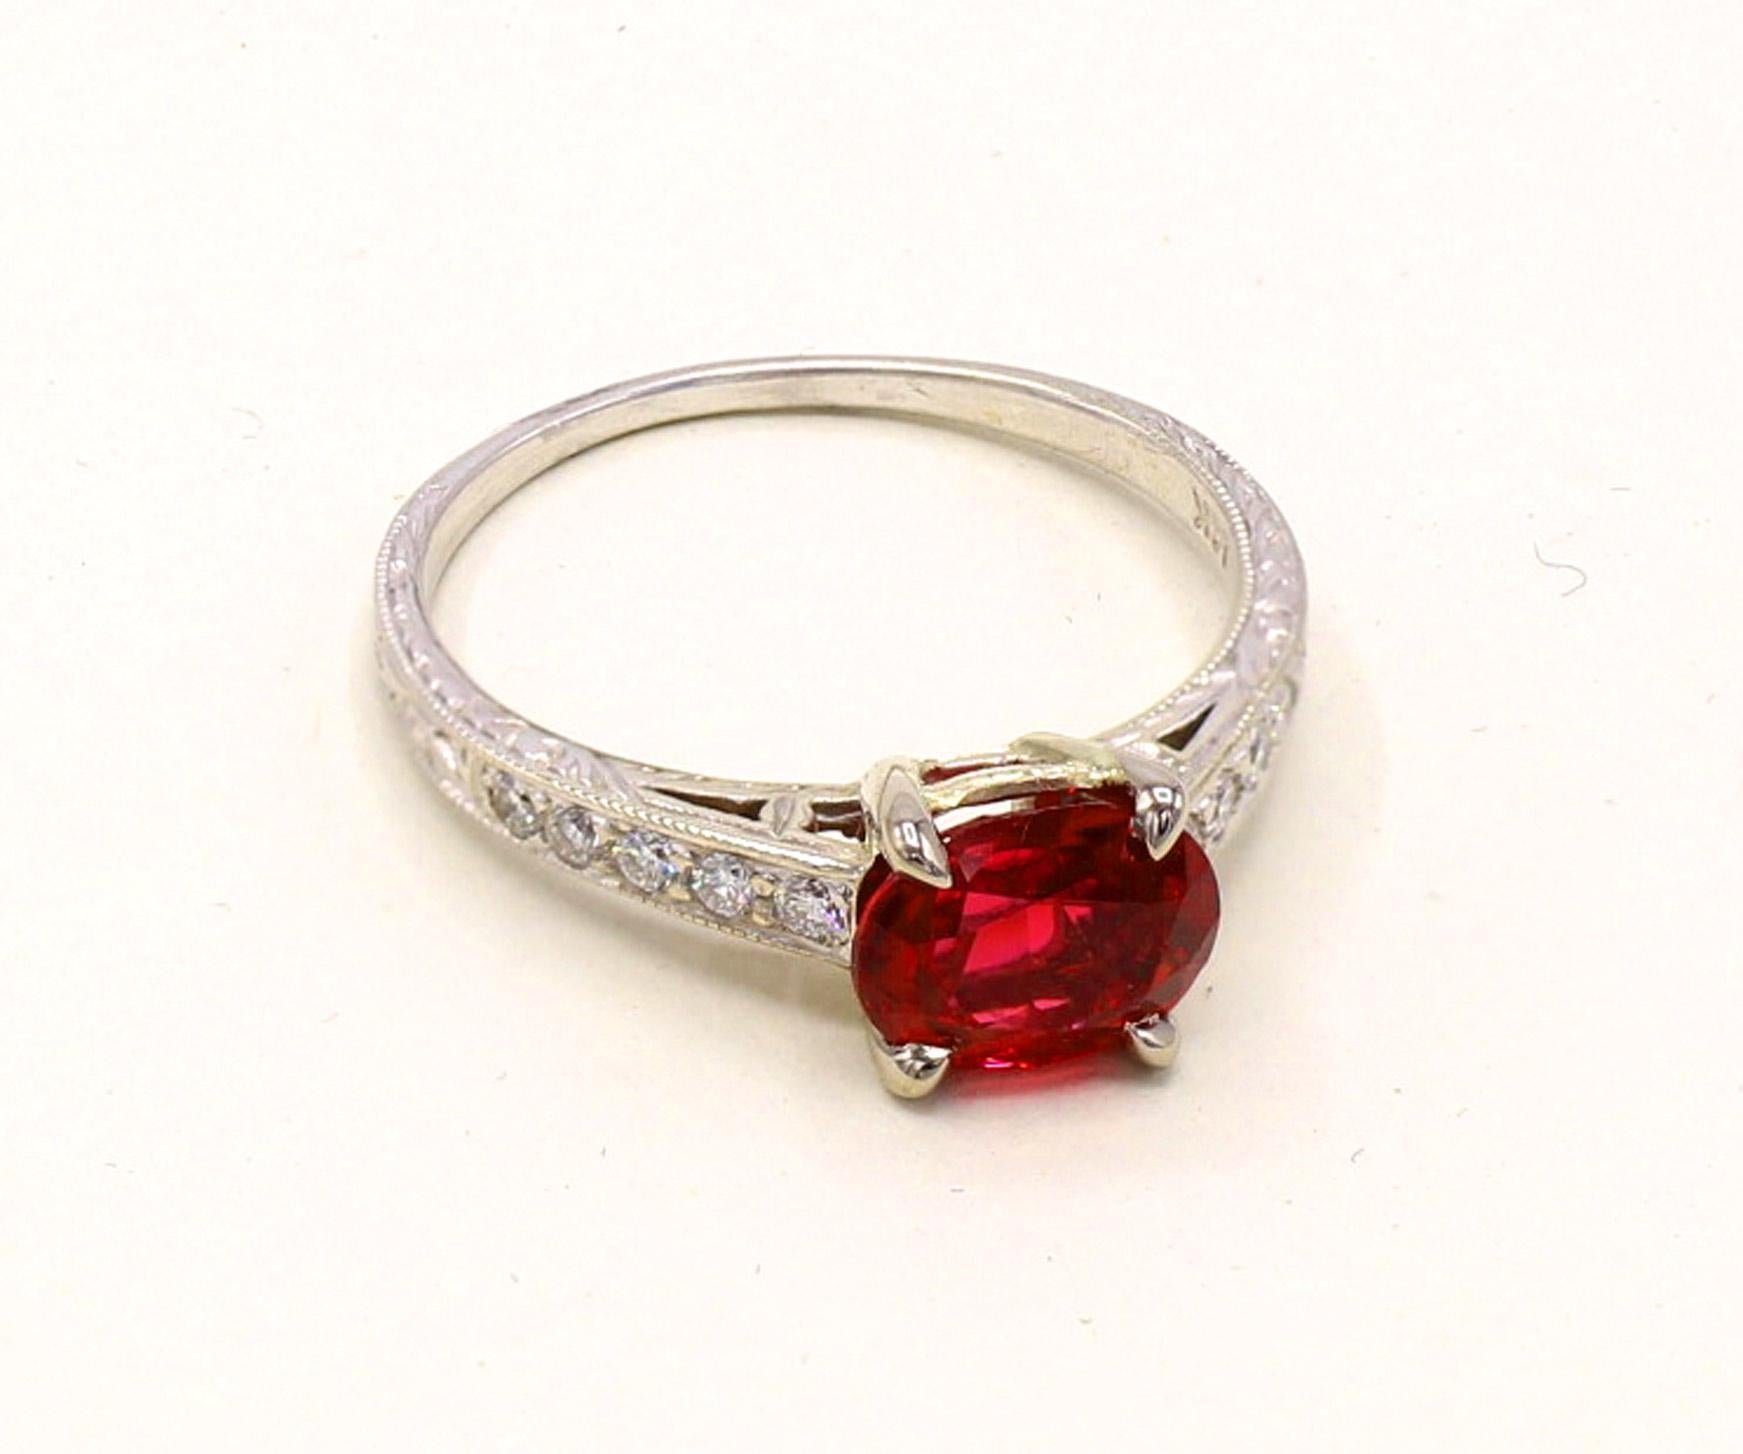 A beautifully cut oval intense red spinel weighing 1.40 carats is the centerpiece of this lovely engagement ring. The red spinel has an amazing saturation of color, brilliance , life and fire. This gem is accompanied by a report from the AGL stating